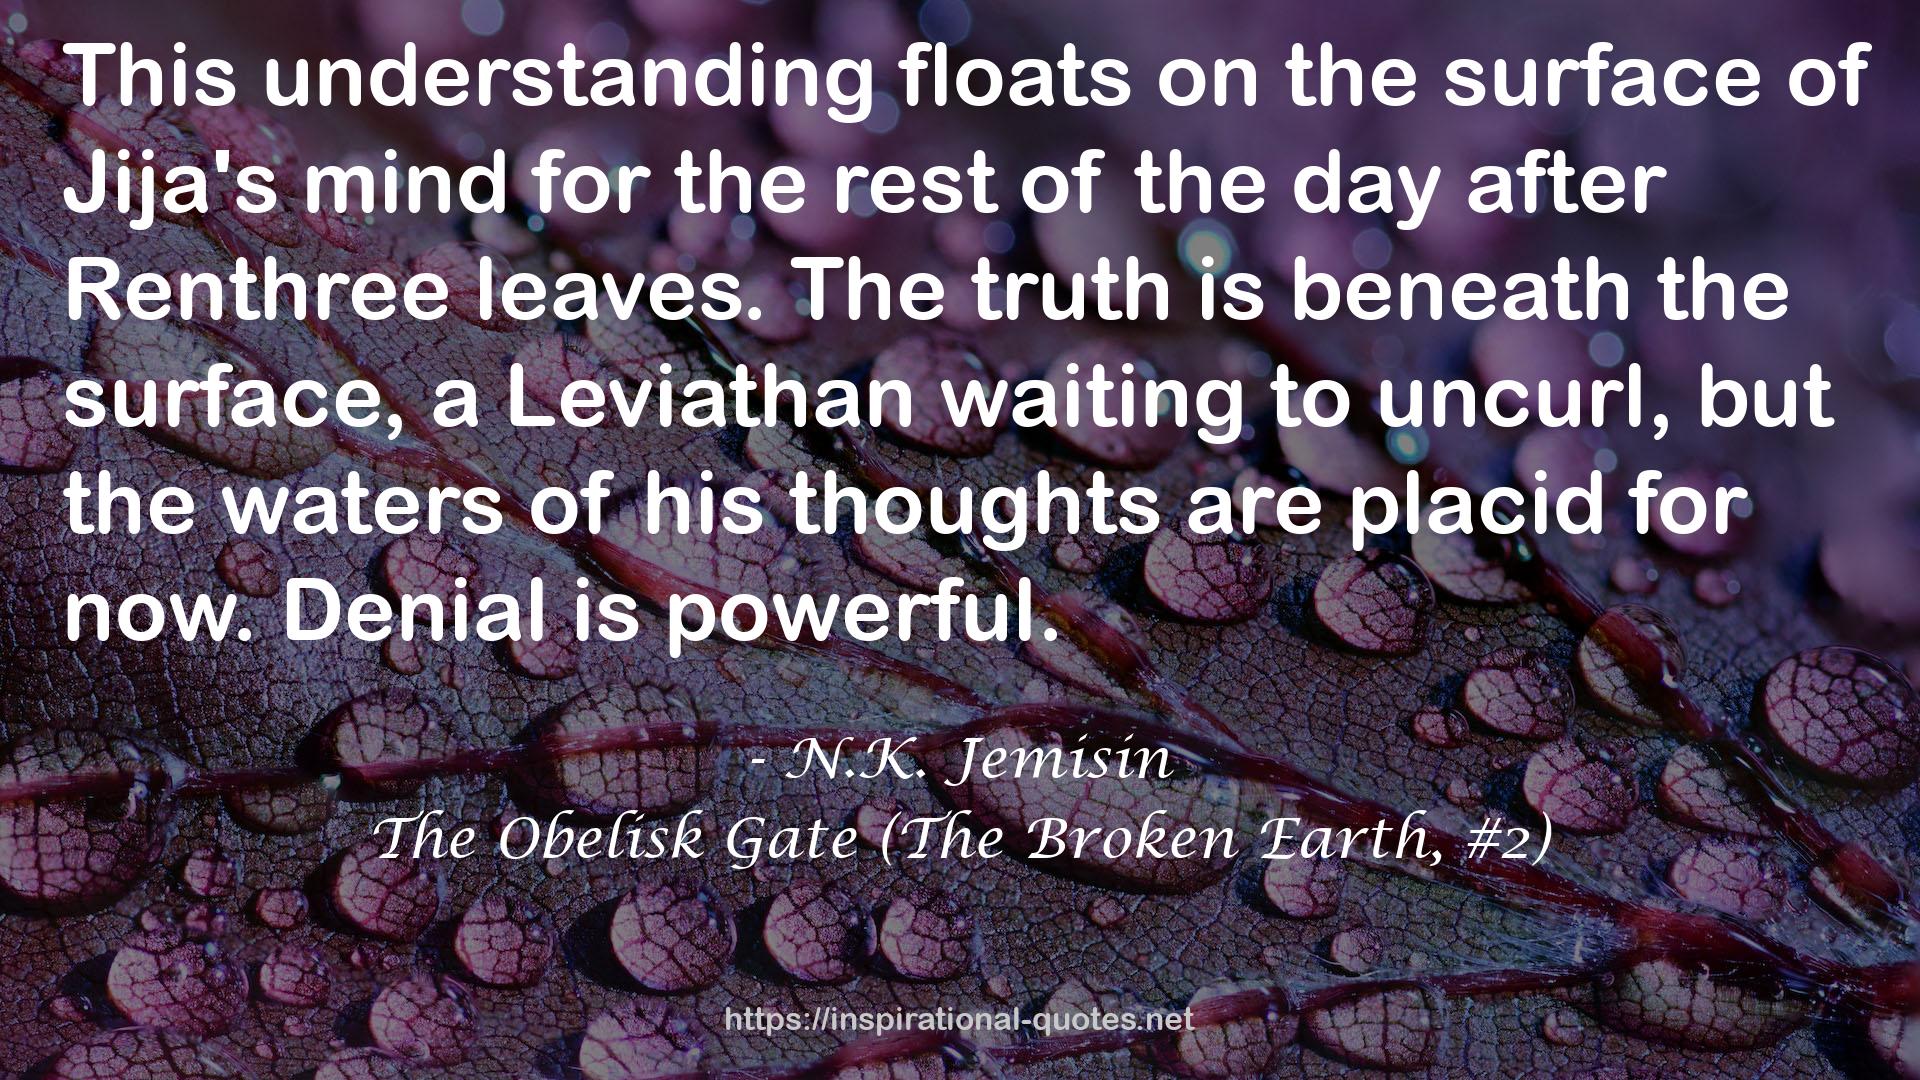 The Obelisk Gate (The Broken Earth, #2) QUOTES